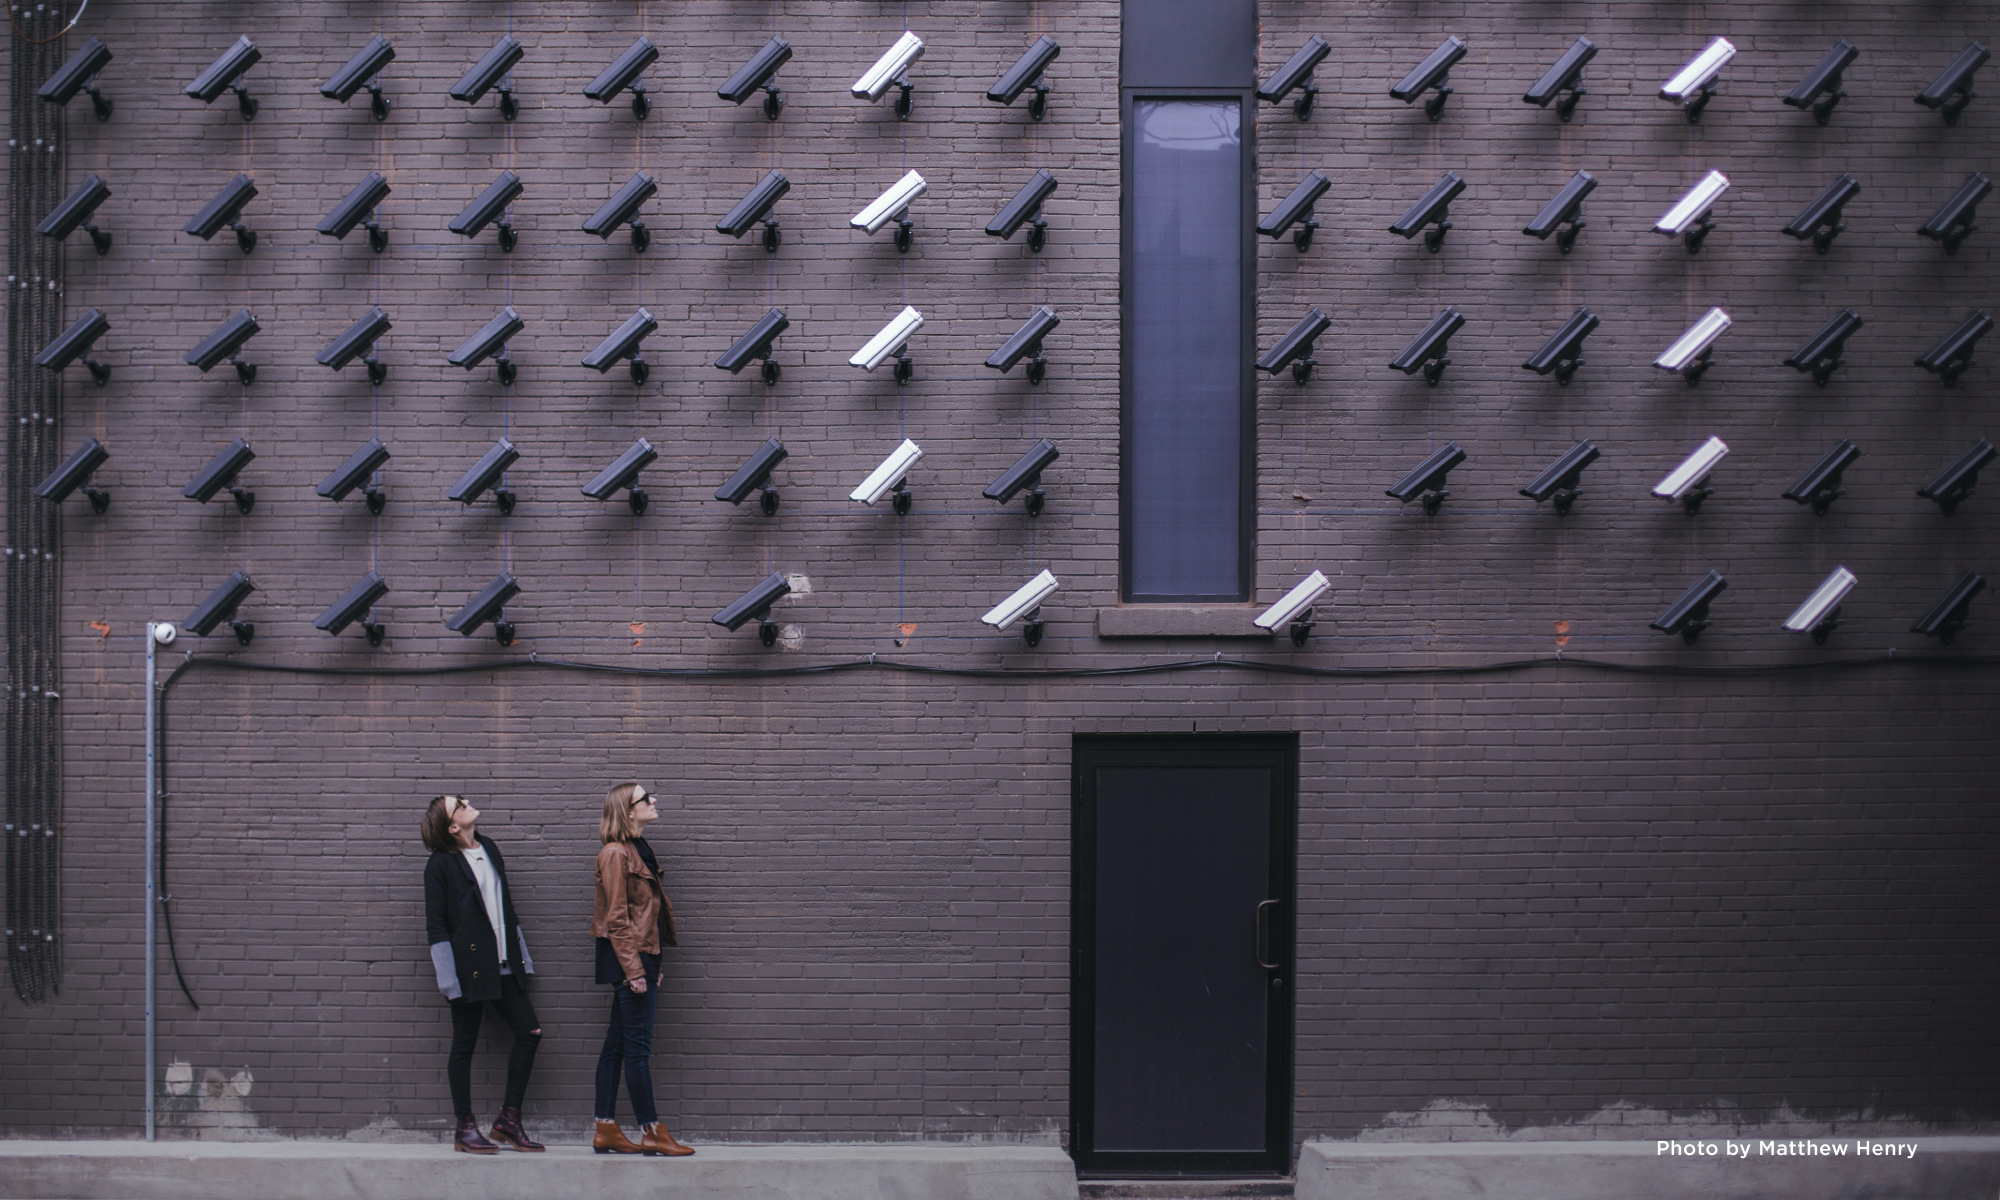 Two women standing in front of a brick wall filled with several security cameras pointed at them.